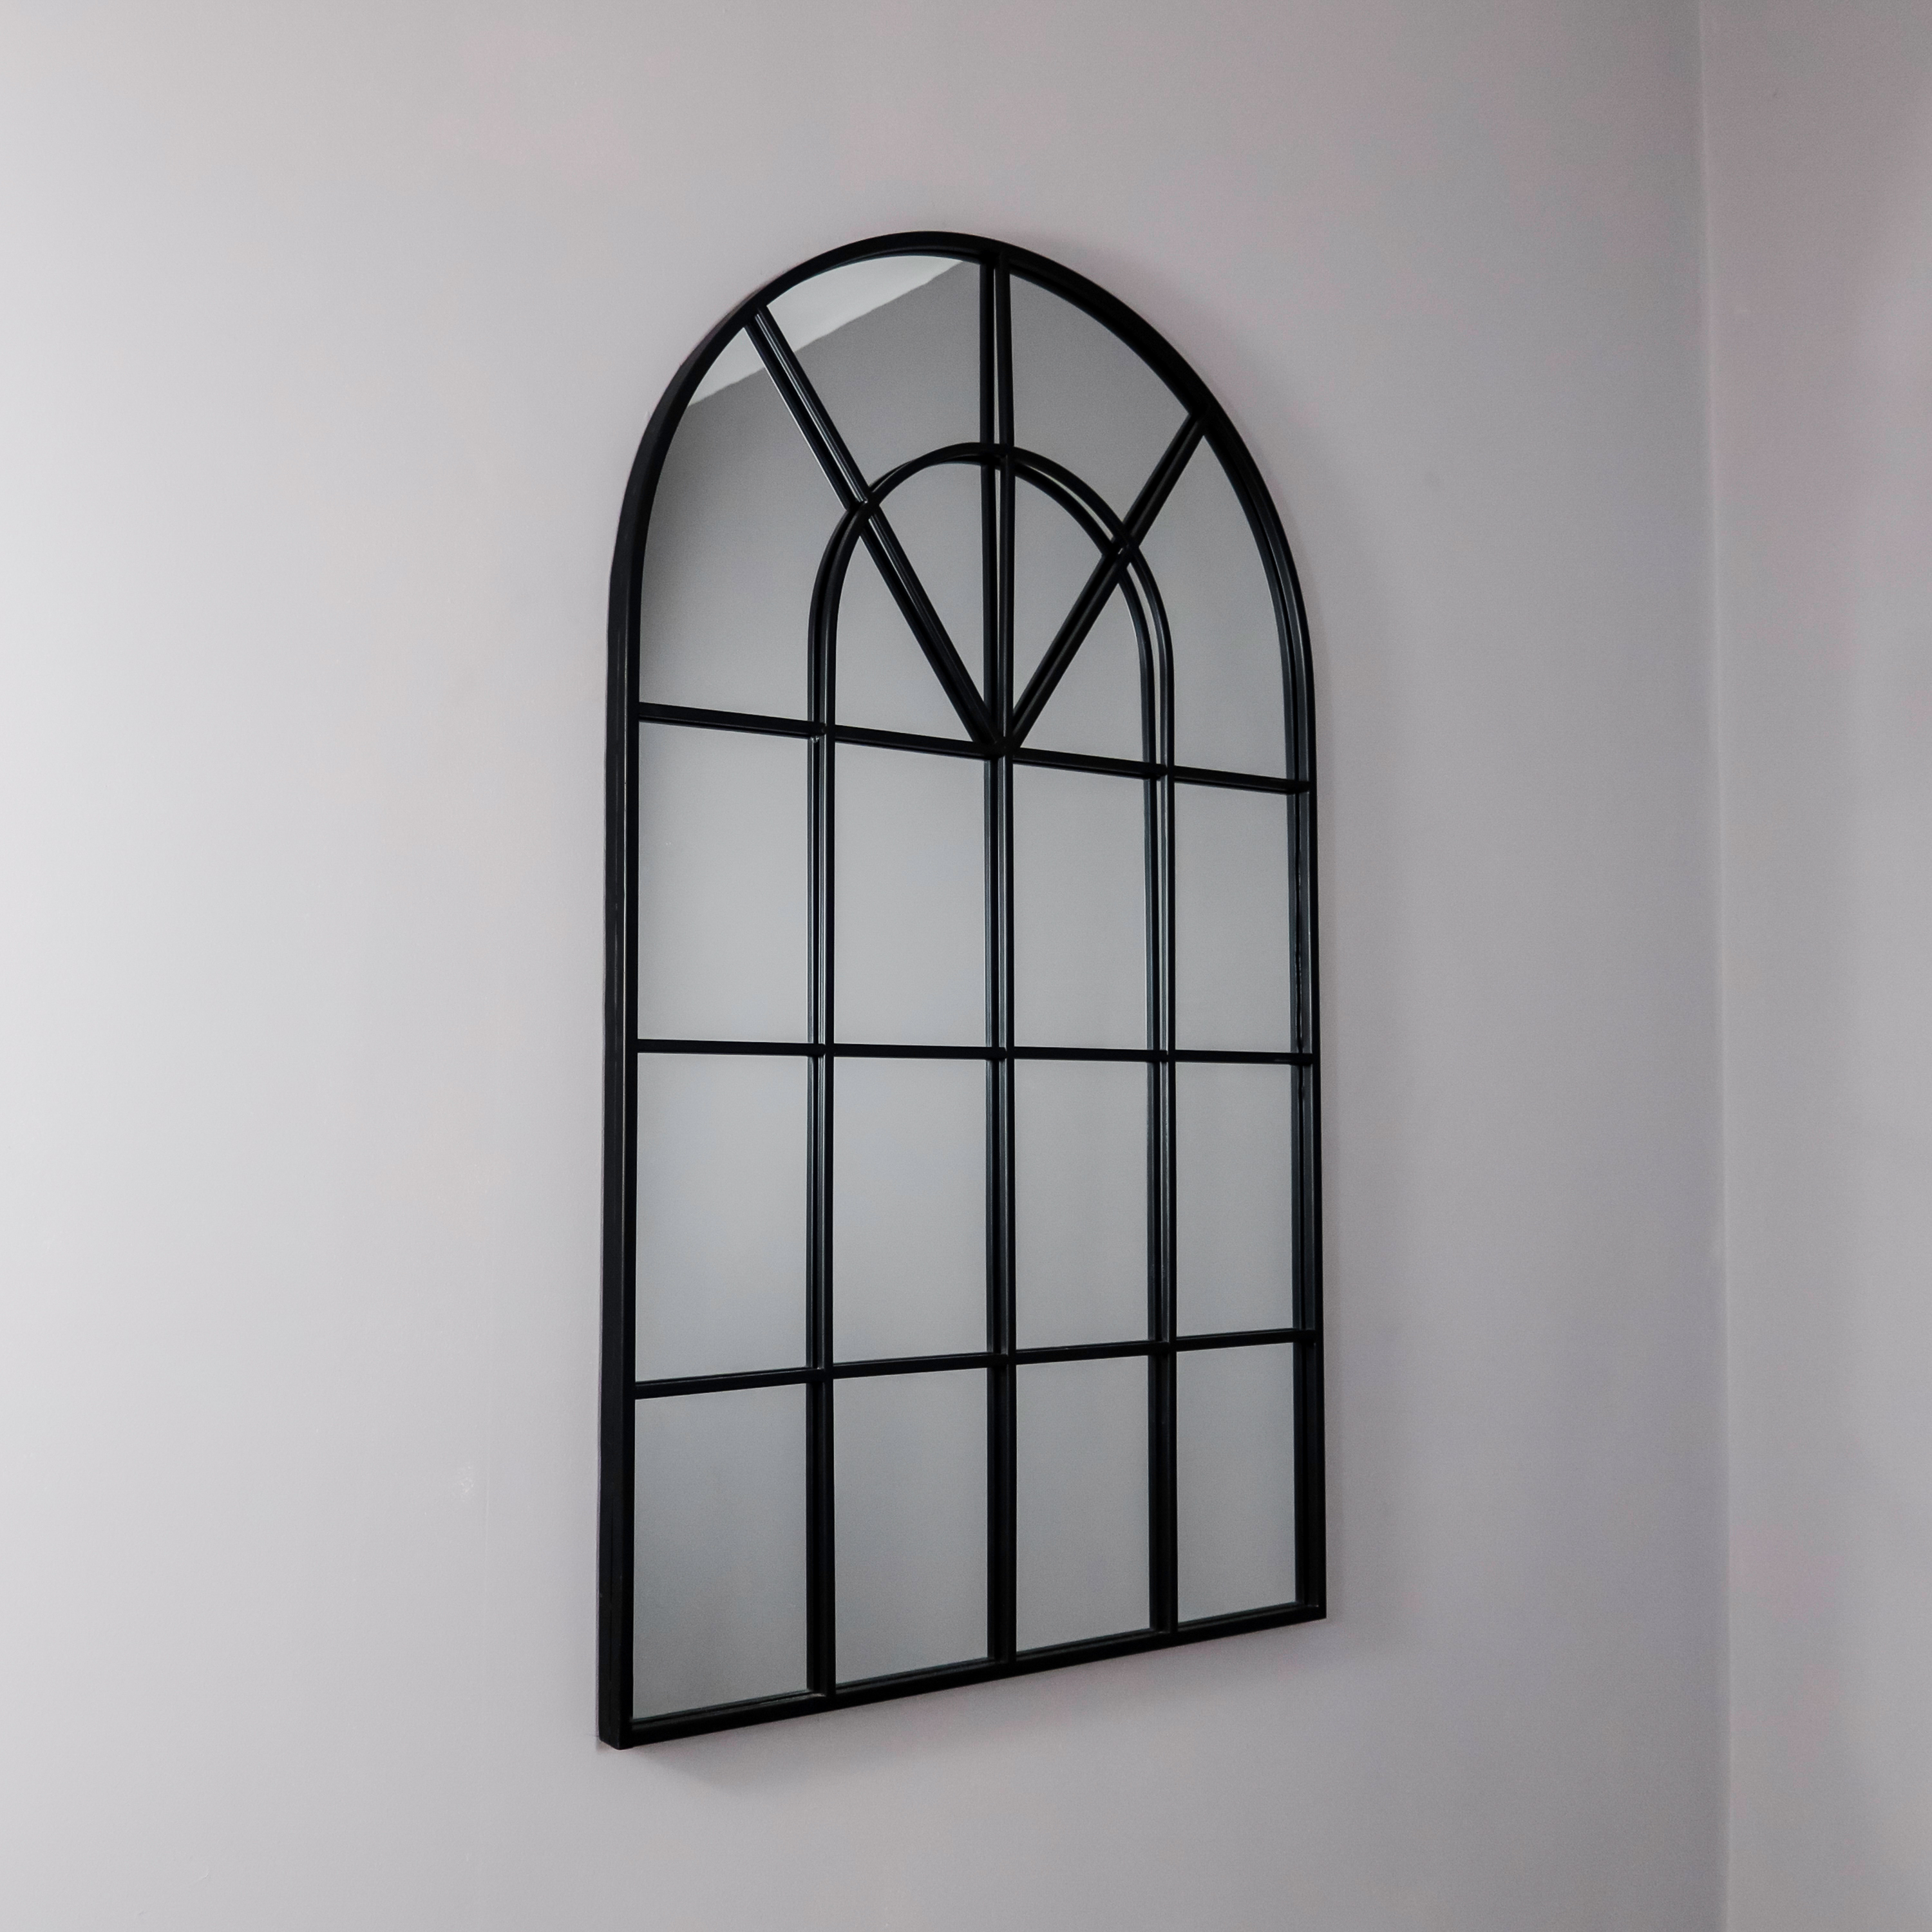 Arched Rome Mirror Wall Decor Home, Arched Window Mirror Black